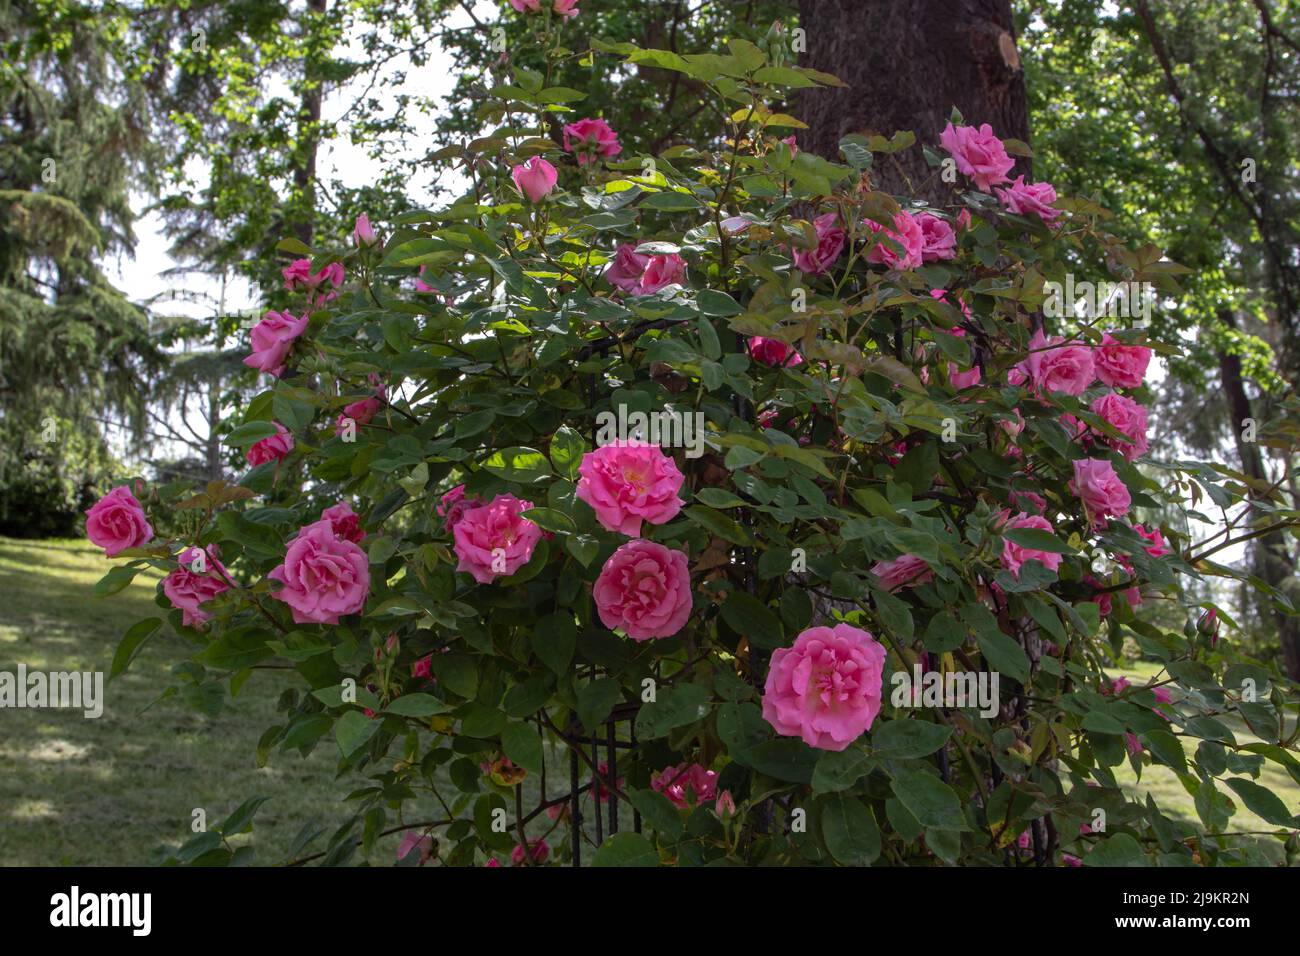 MADRID,SPAIN - May 12,2022: Zephirine drouhin old fashioned climbing rose with deep rose pink flowers in the Rose Garden Ramon Ortiz,Rosaleda del Parq Stock Photo